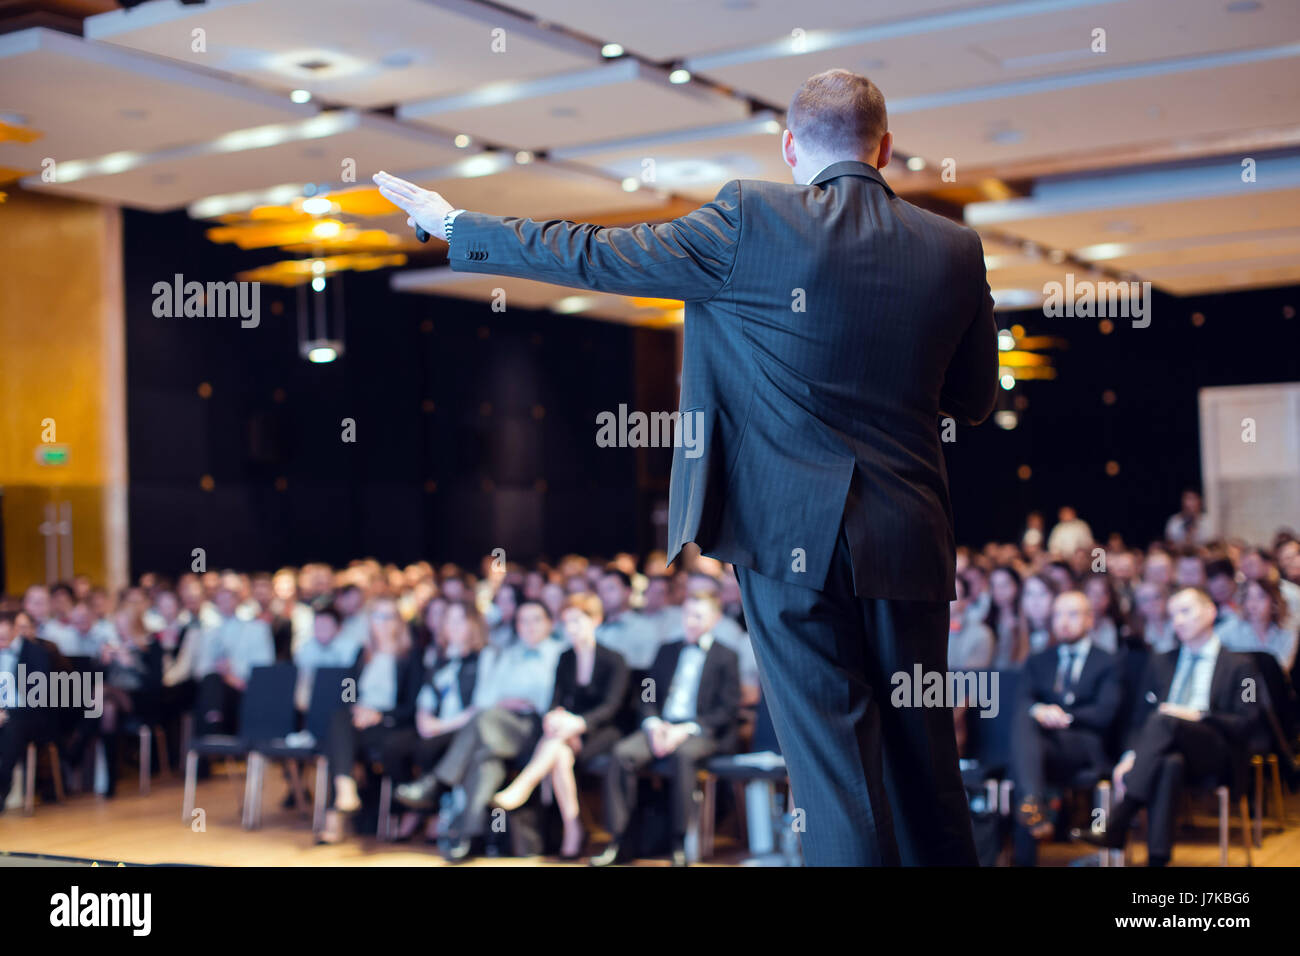 Speaker giving talk at business conference event Stock Photo